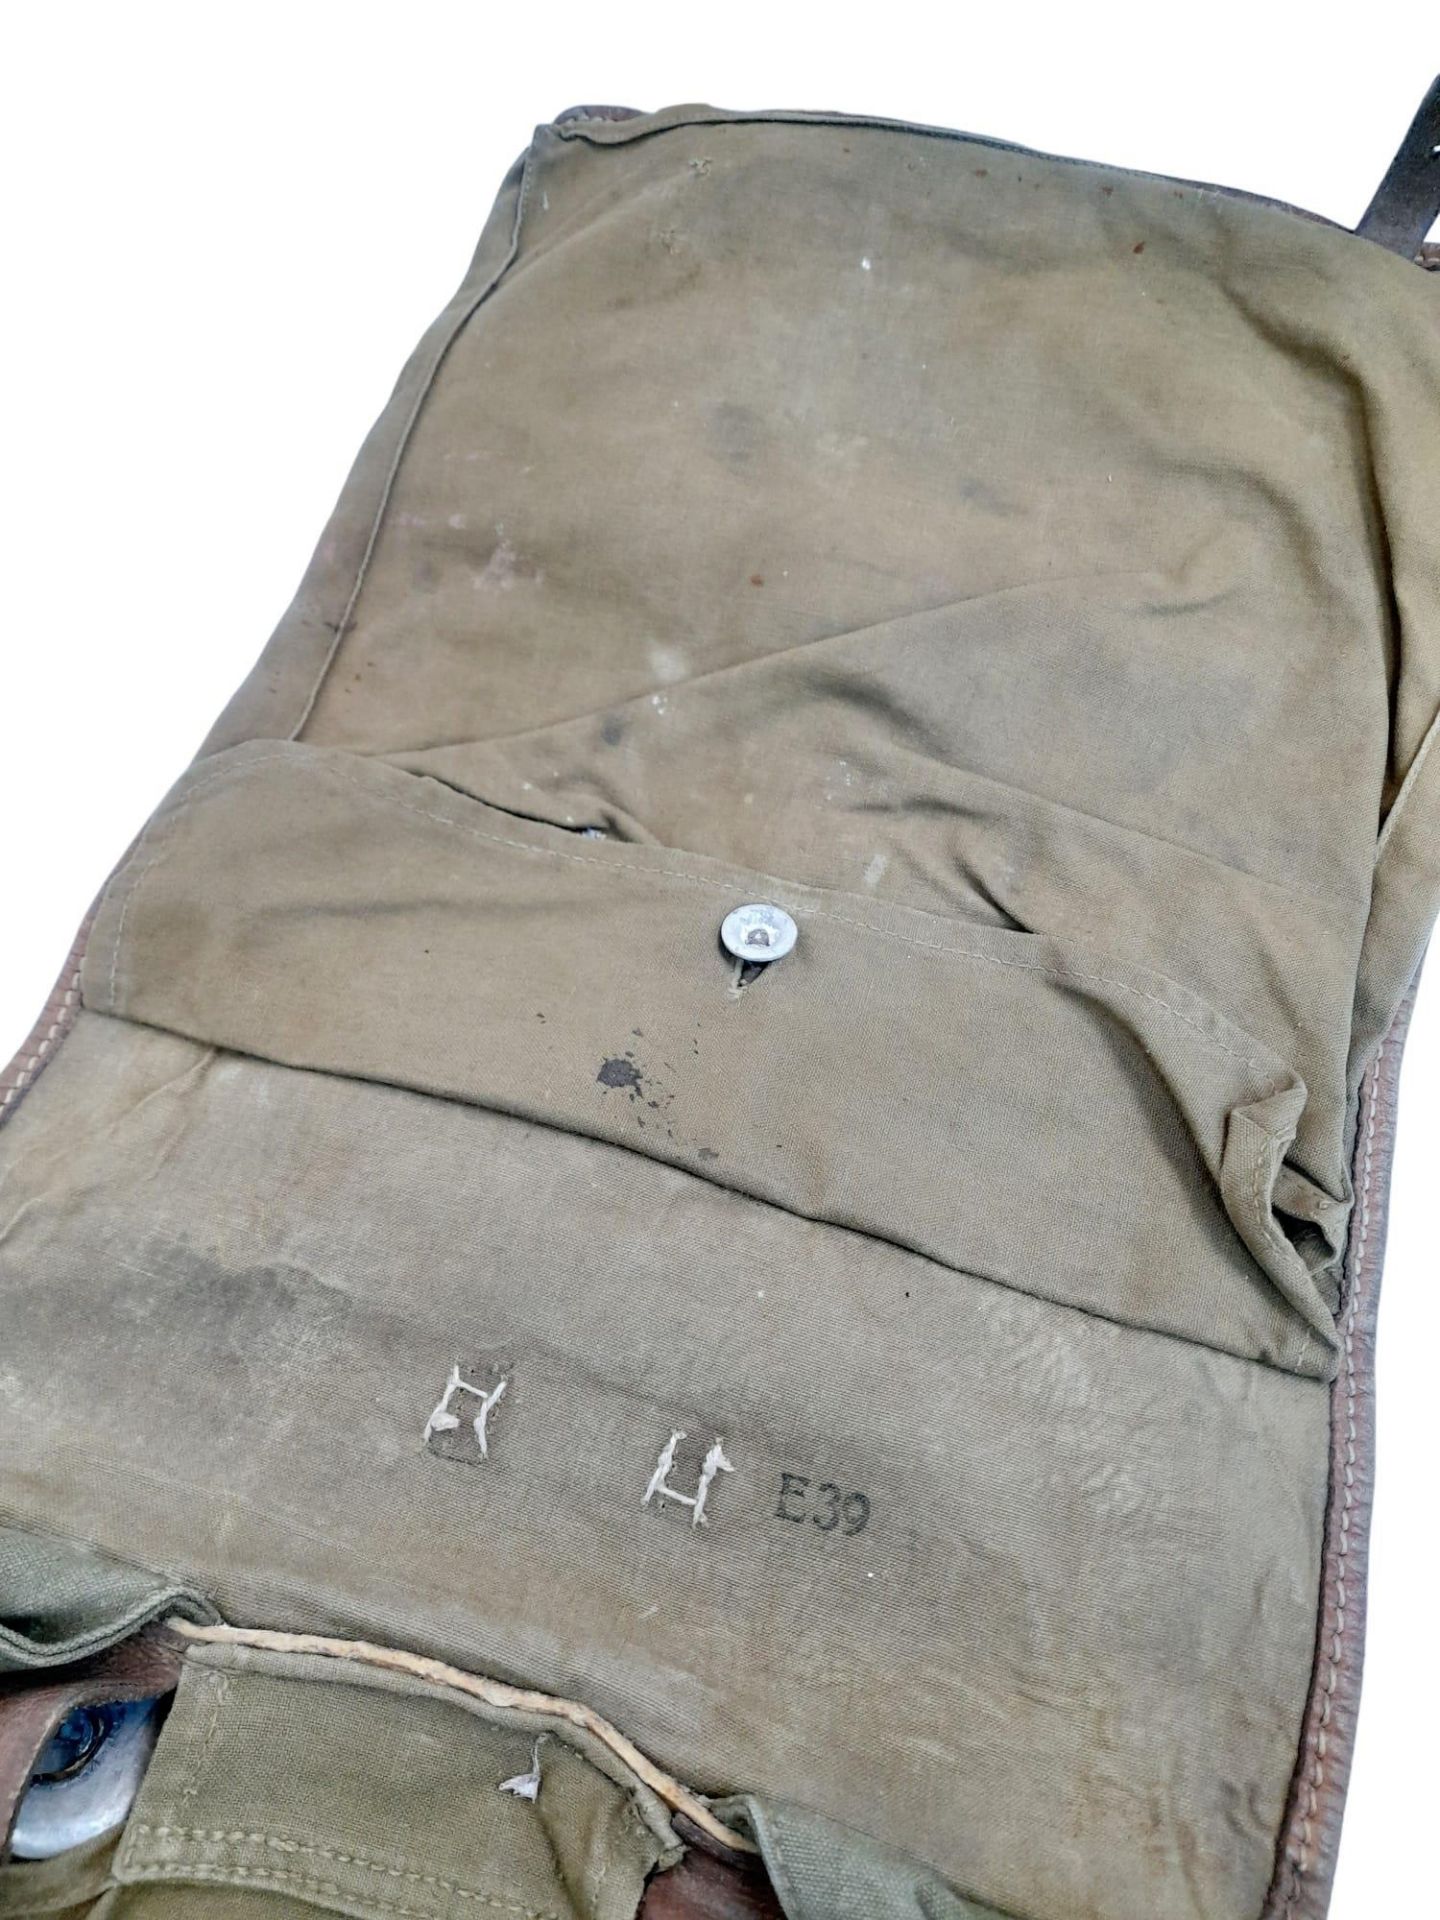 WW2 German Tournister “Pony Pack” Dated 1939. Used by the Hitler Youth and ground troops. - Image 7 of 7